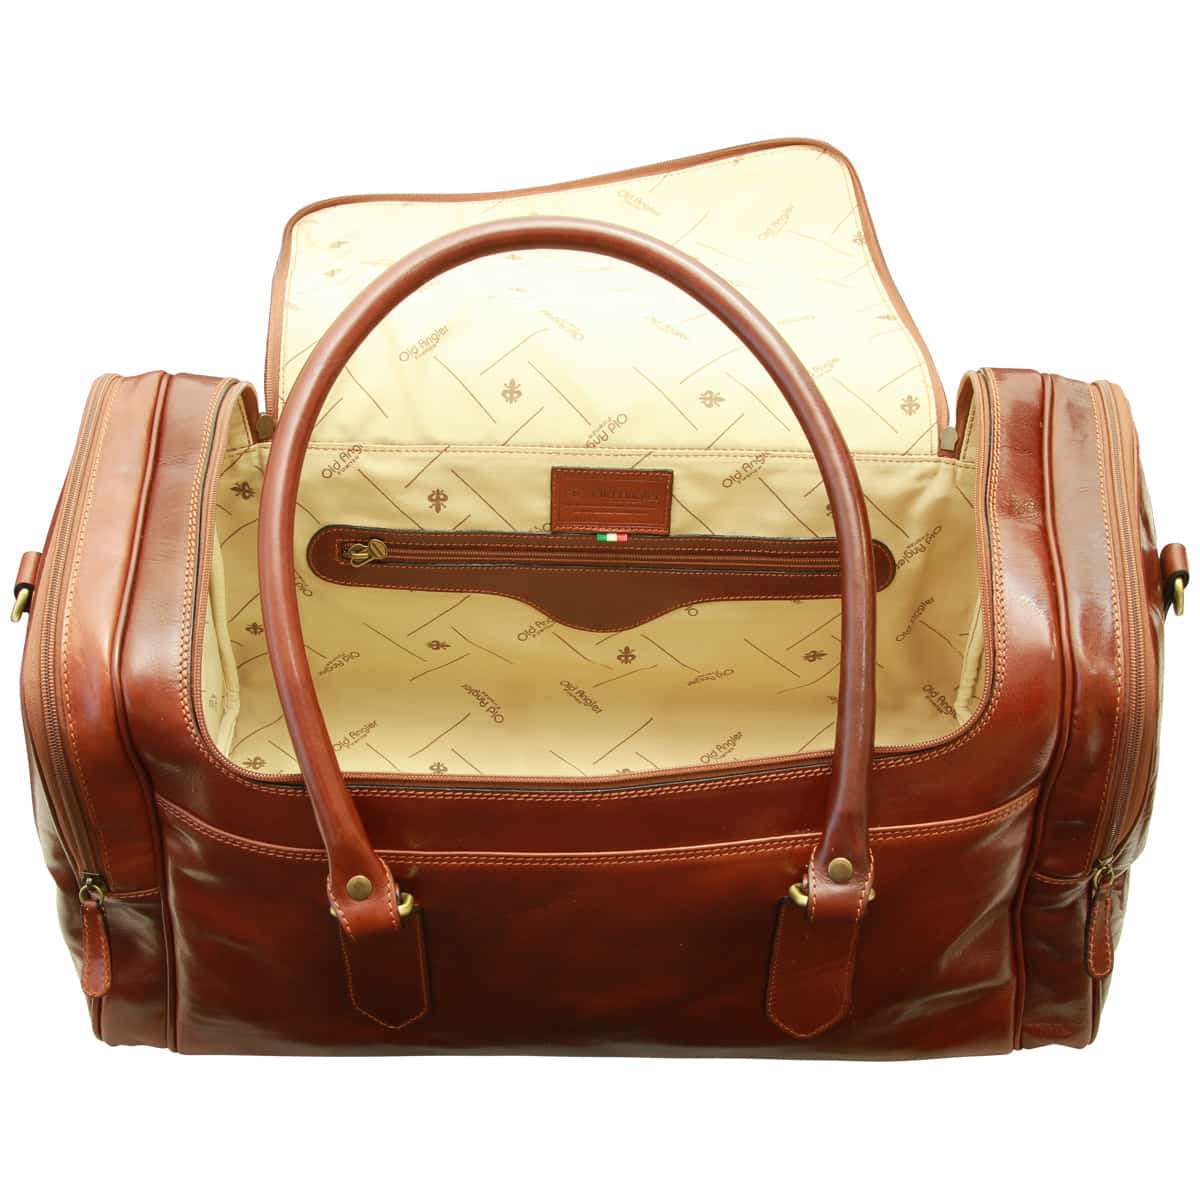 Arno Leather Travel Bag - Brown | 077805MA US | Old Angler Firenze